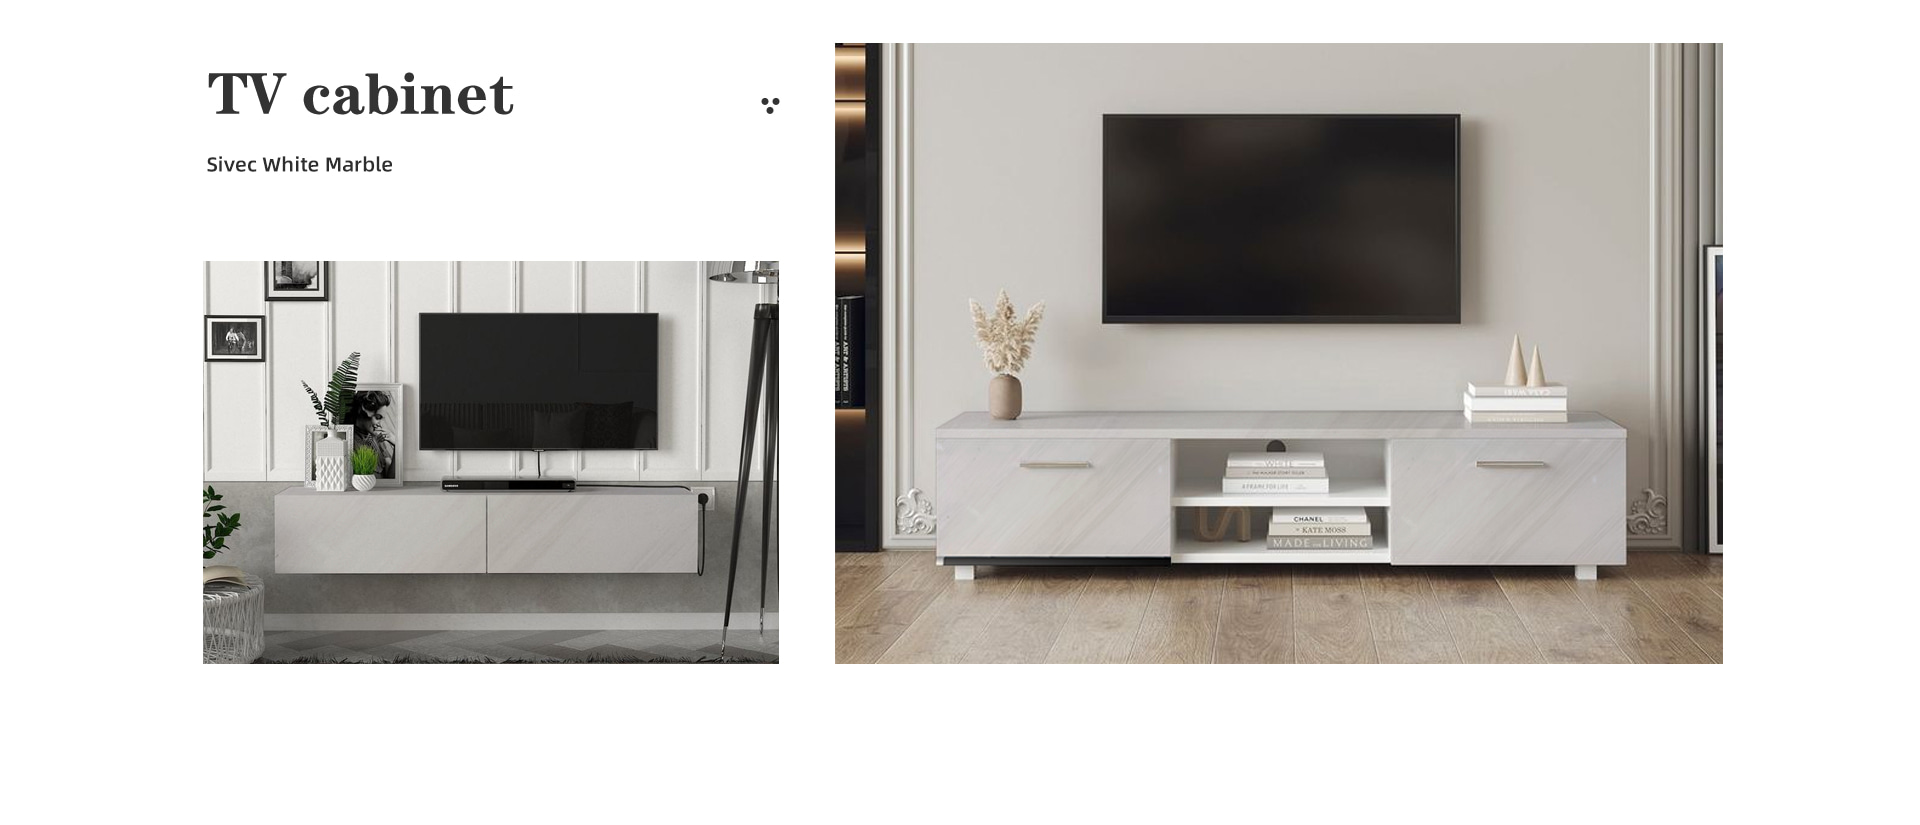 sivec white marble TV cabinet